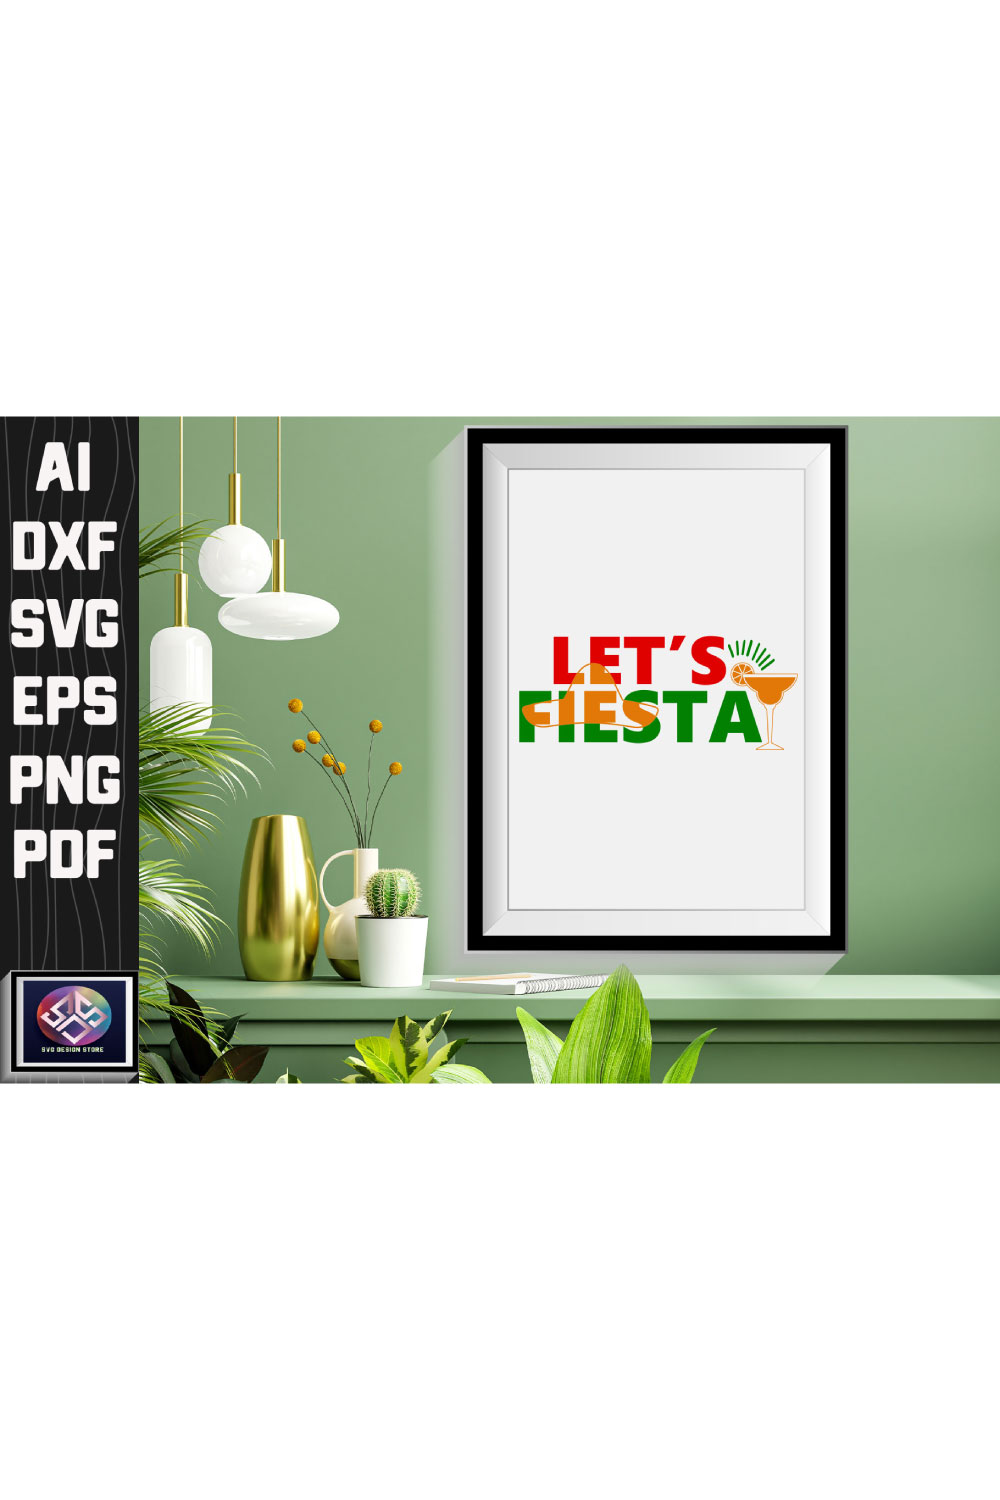 Let’s Fiesta pinterest preview image.